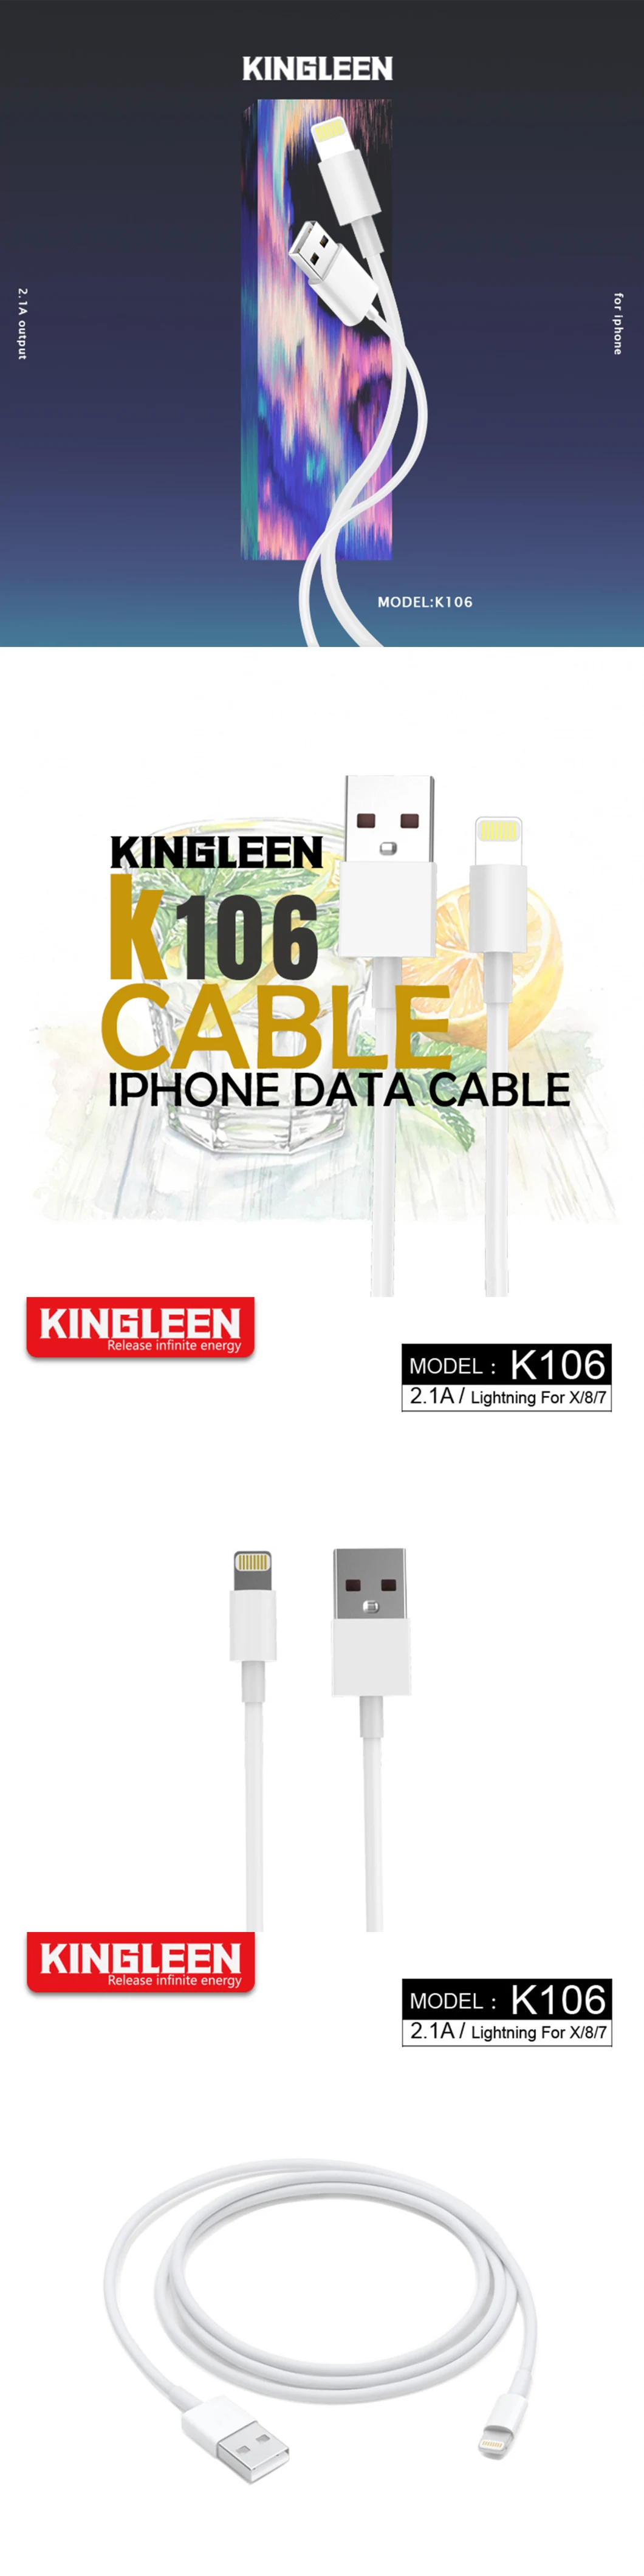 iPhone Cable 3FT USB Charging & Syncing Fast Charging Cable Cord Compatible iPhone iPad Apple Devices